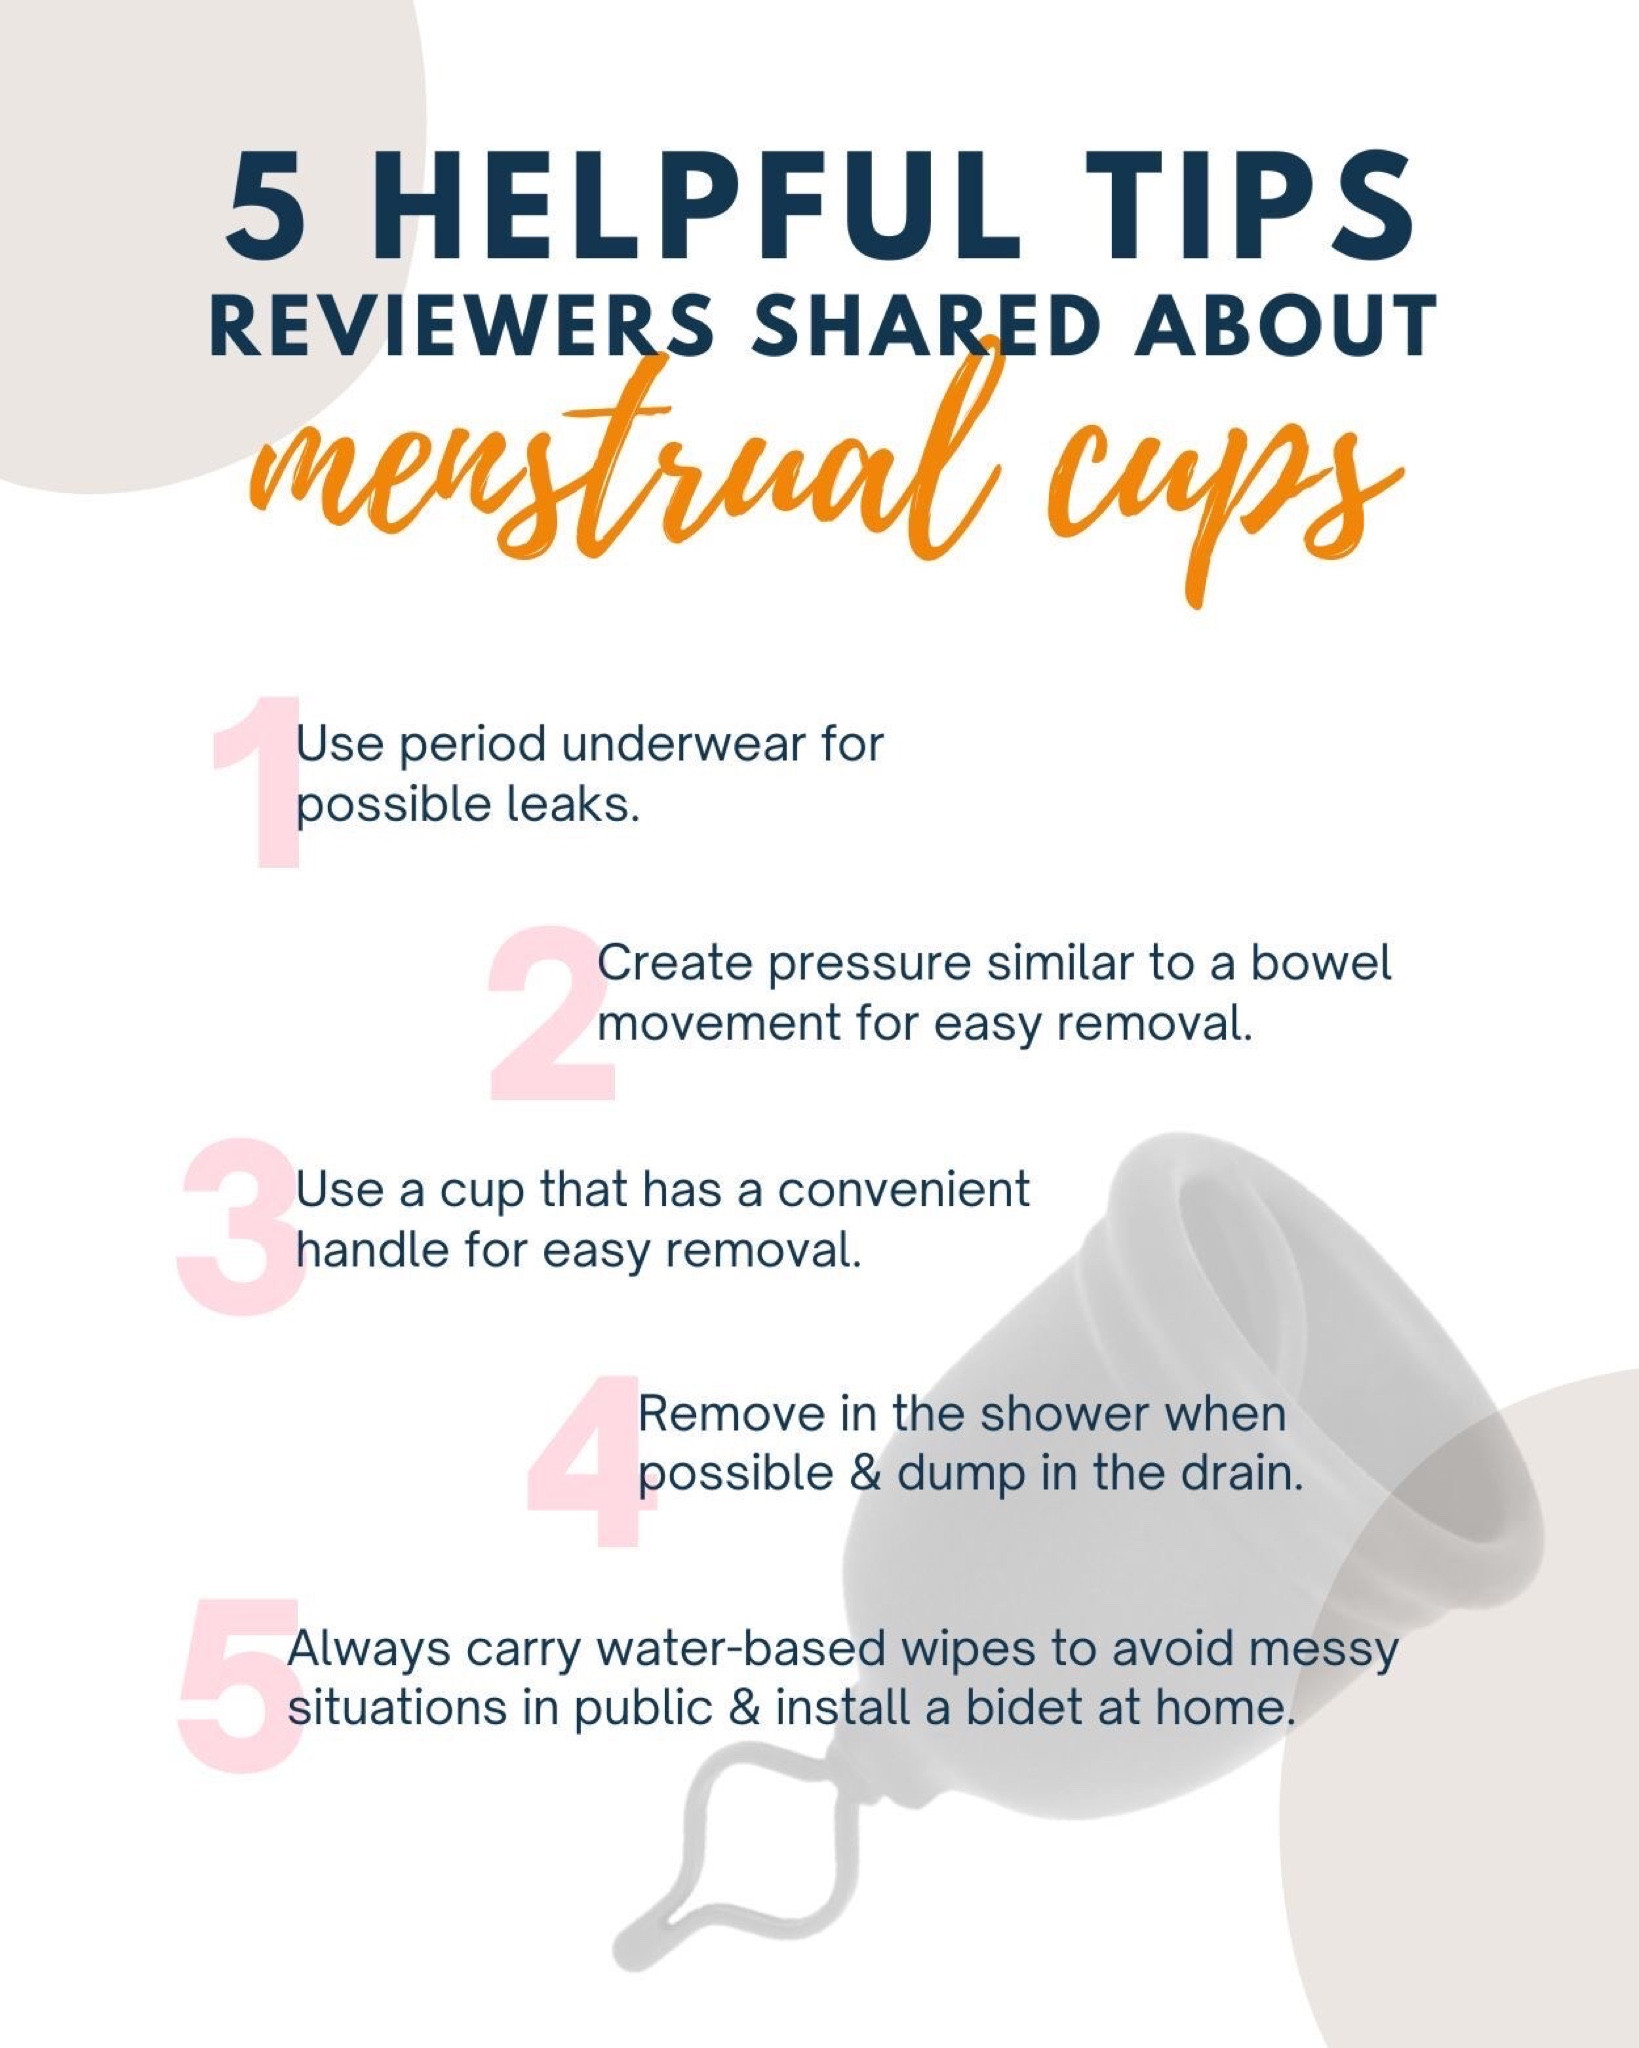 Cora Menstrual Cup, Medical Grade Silicone, Clear, 12 Hour Leak